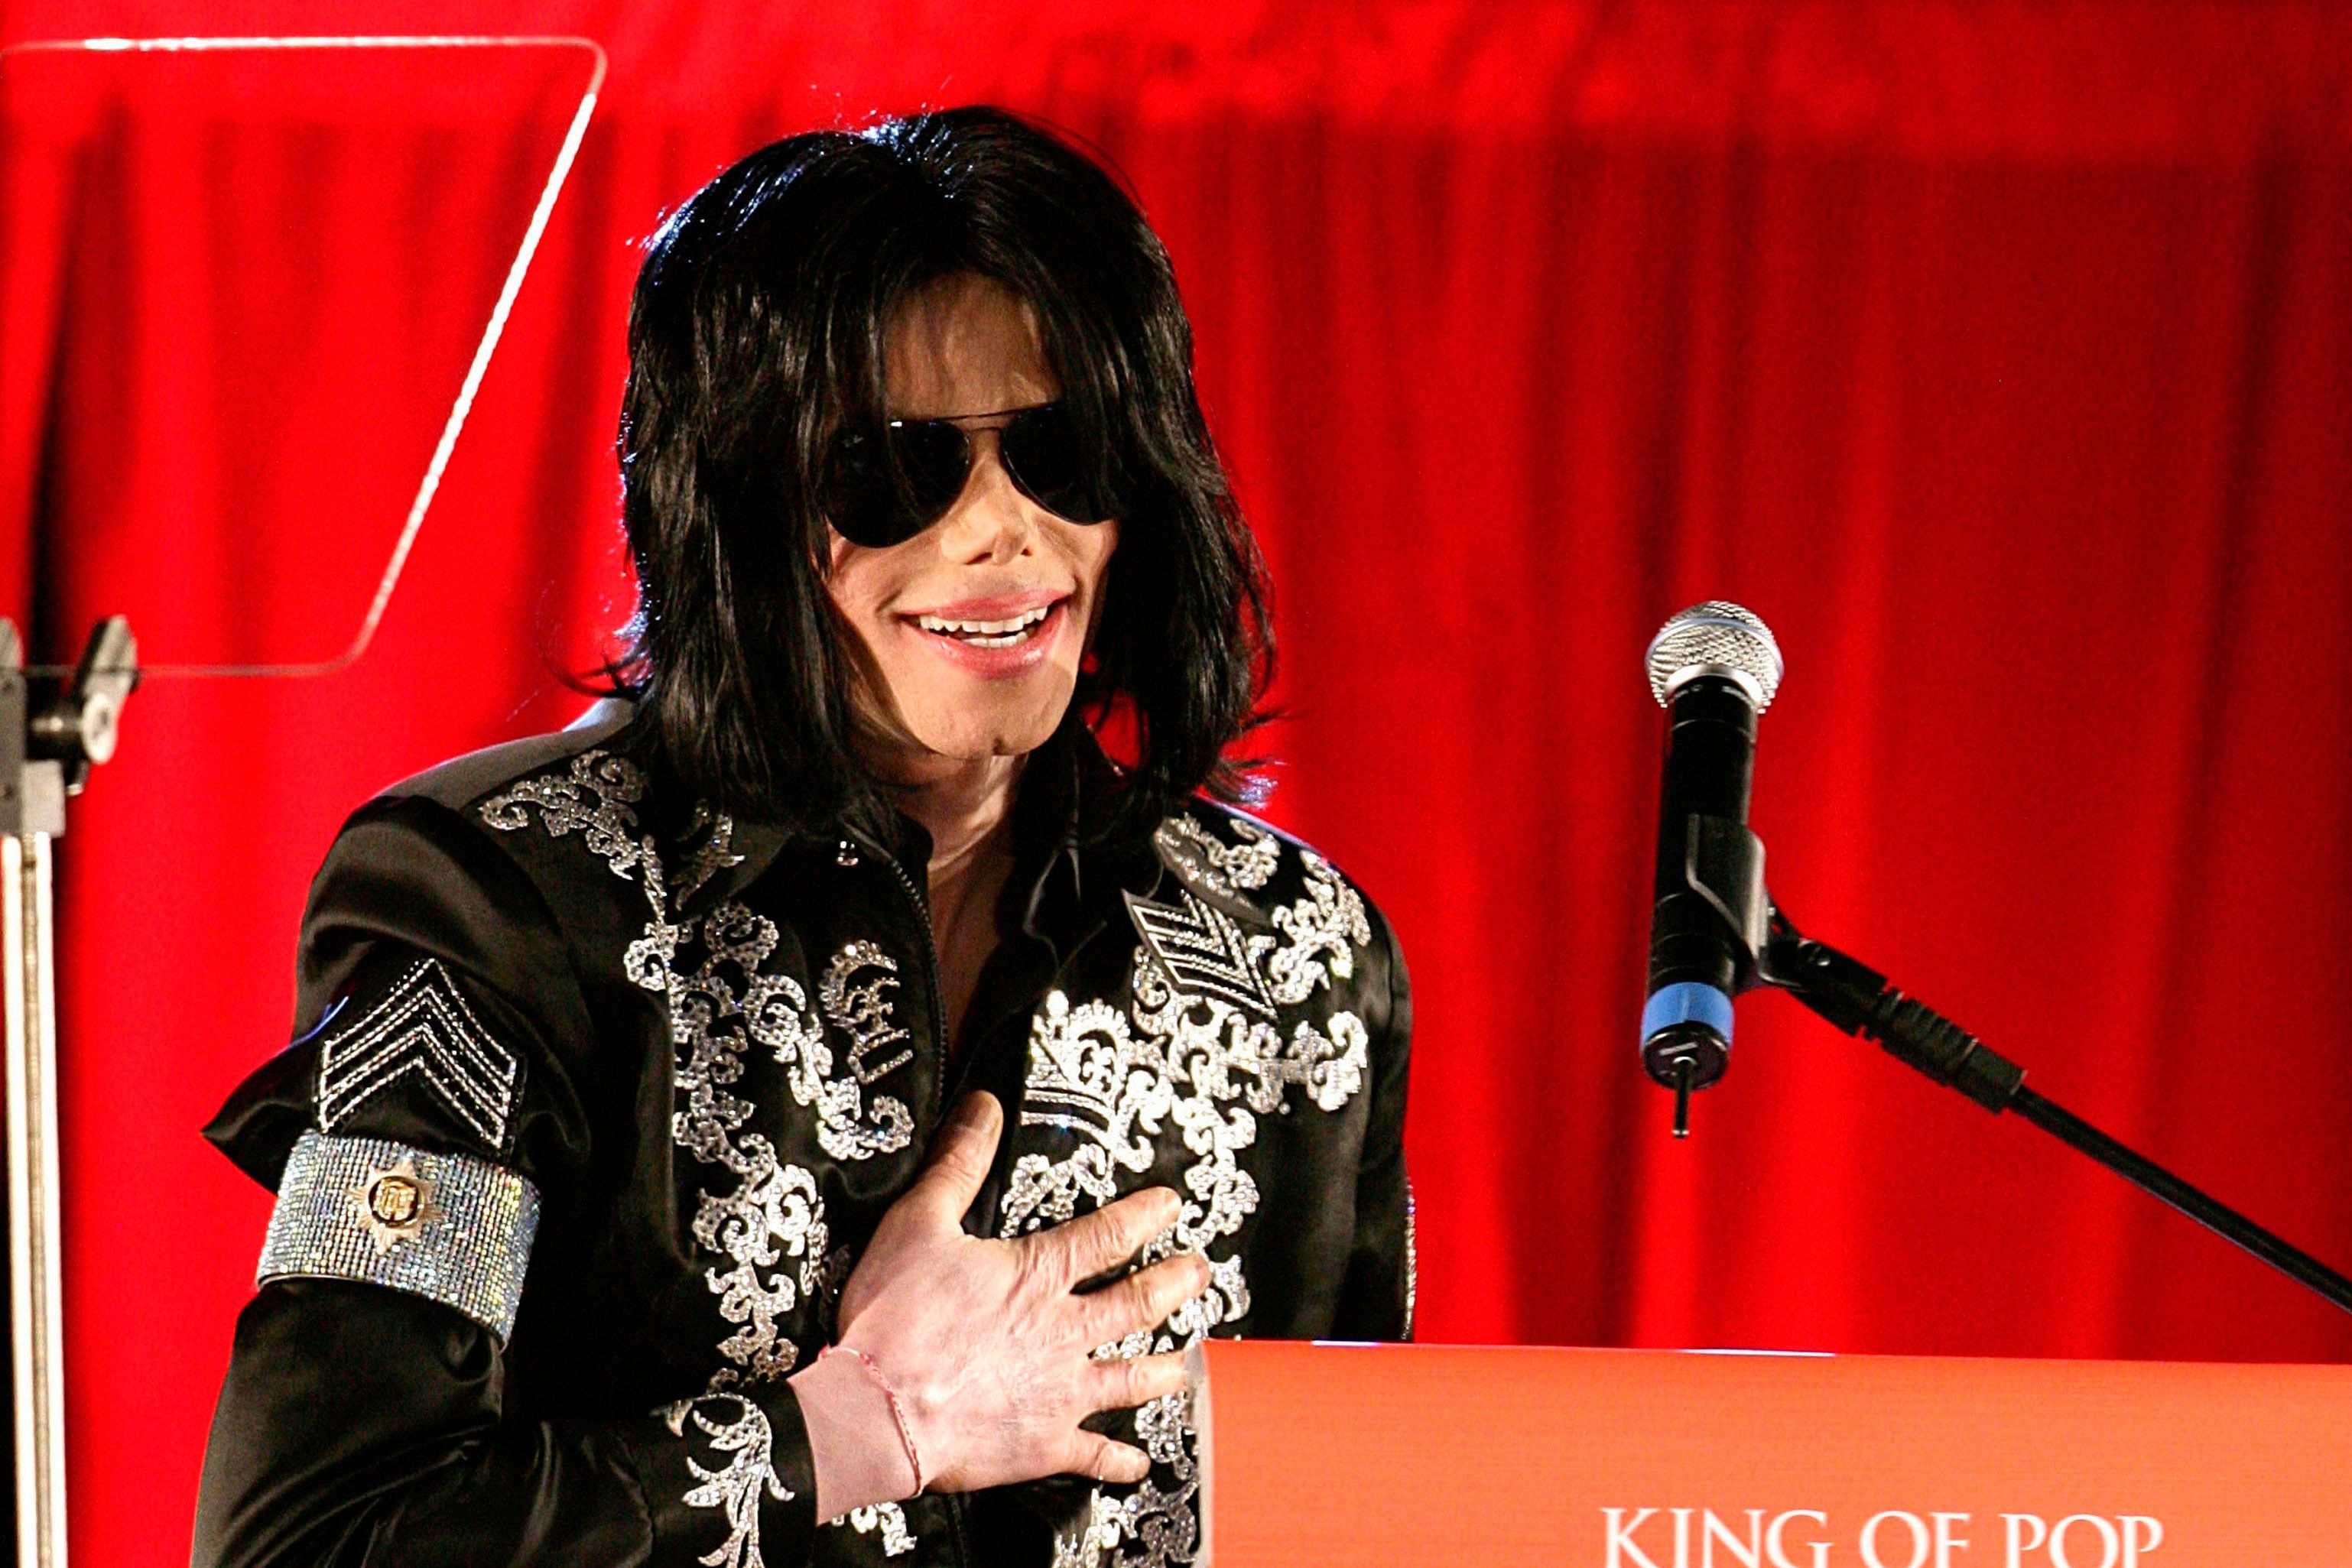 Calls to boycott Michael Jackson's music after explosive HBO